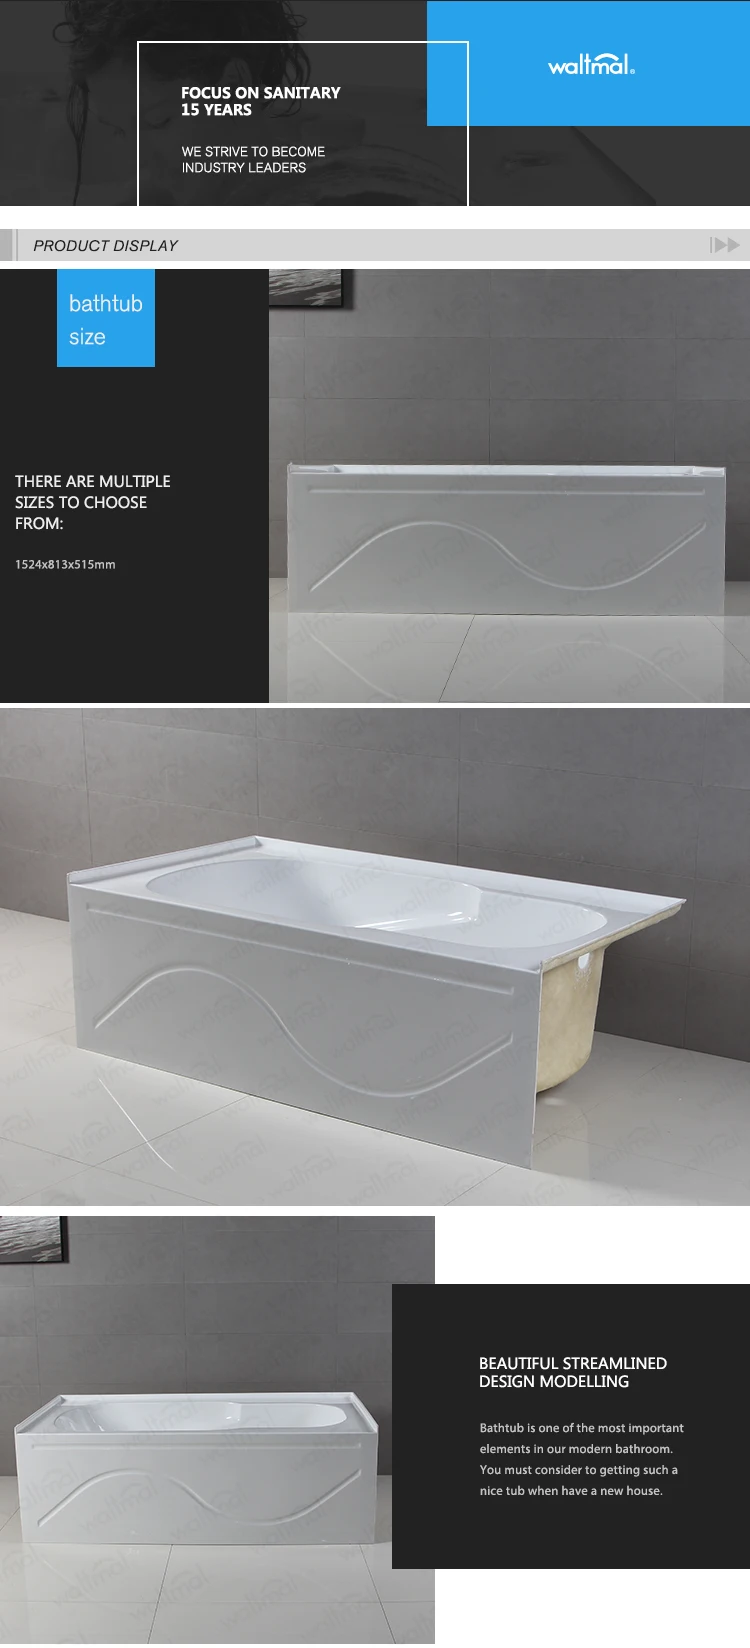 Popular Used In Home 2018 Cheap Alcove Vertical Bathtub With Reversible Drain